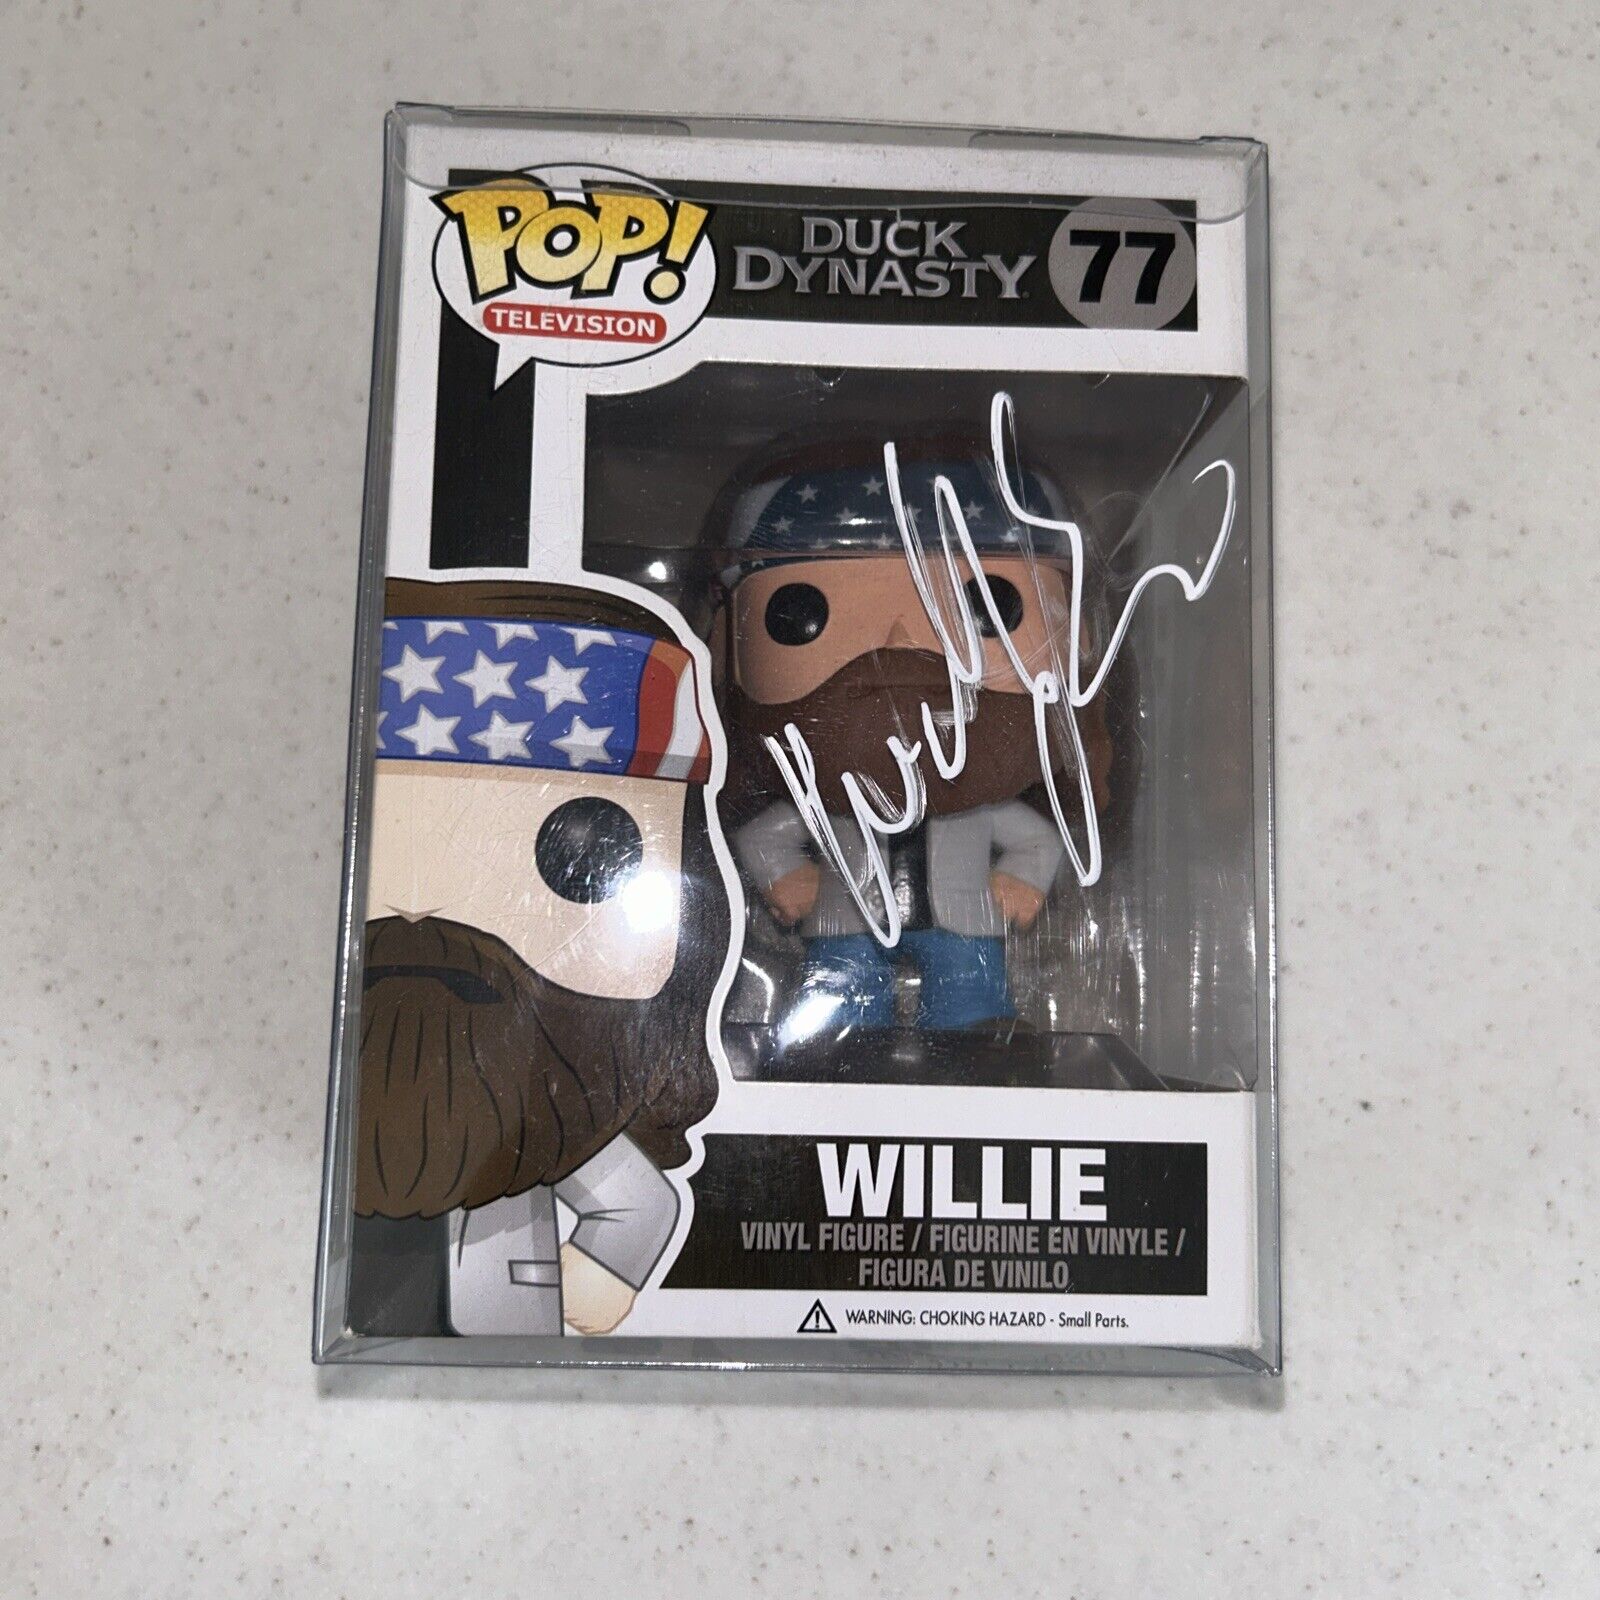 WILLIE ROBERTSON SIGNED FUNKO POP OBTAINED AT CHURCH WITH TIM TEBOW